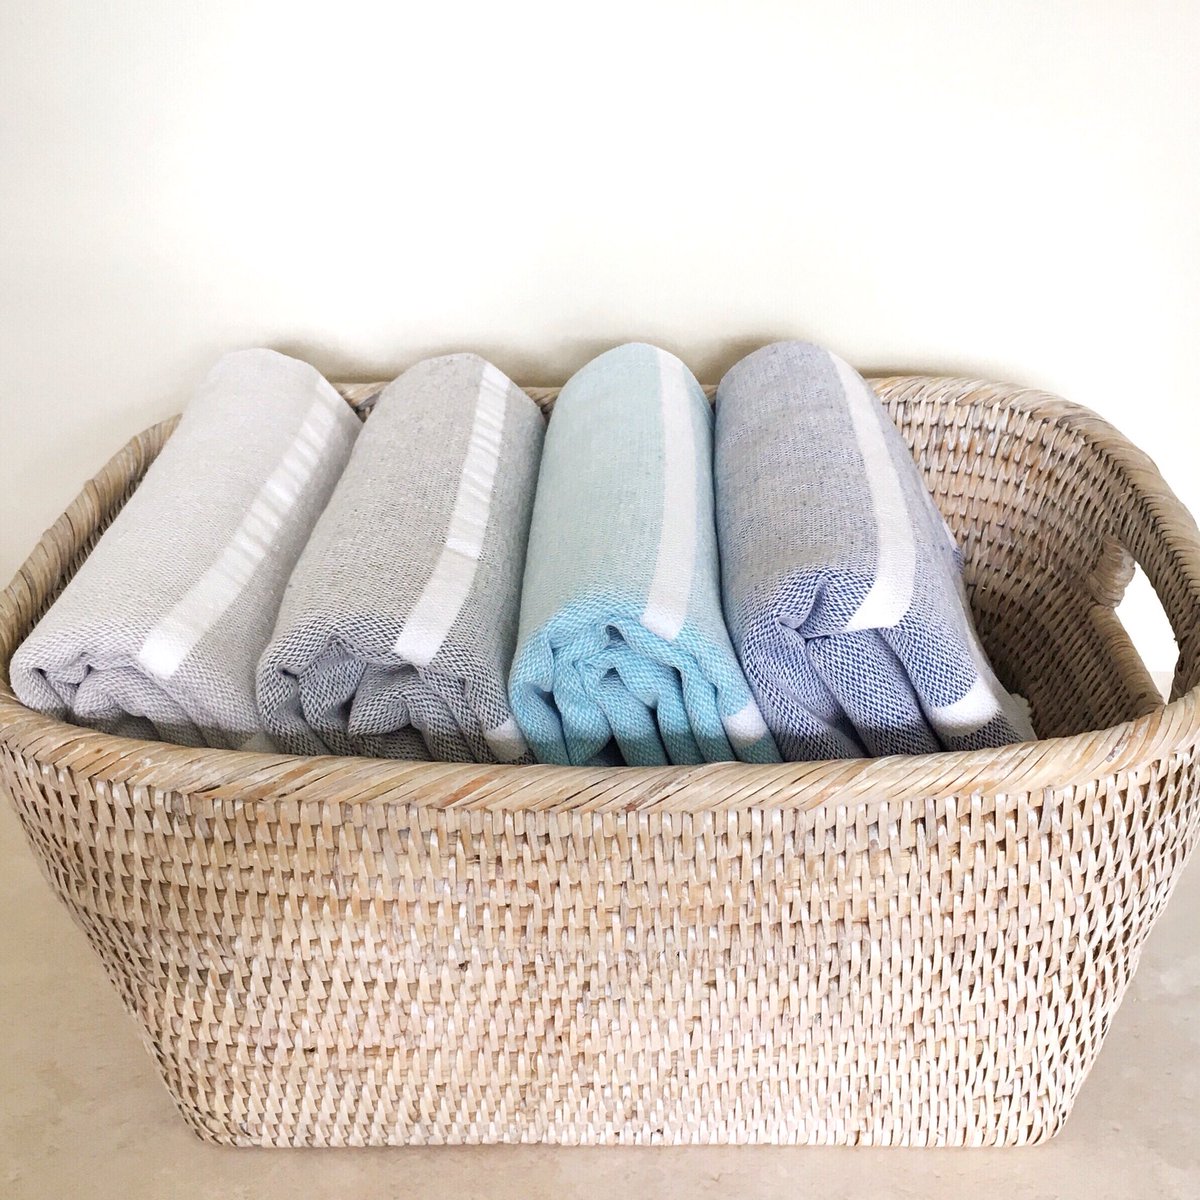 💙 Cool colours for cool girls (and guys - our Saunton towels are very popular with the boys too 🌴) Grab one or two for the summer, for your home and holidays 💙

sandandsalt.co.uk/collections/ne…

#hammamtowel #turkishtowel #holidayaccessories #sandandsaltgirl